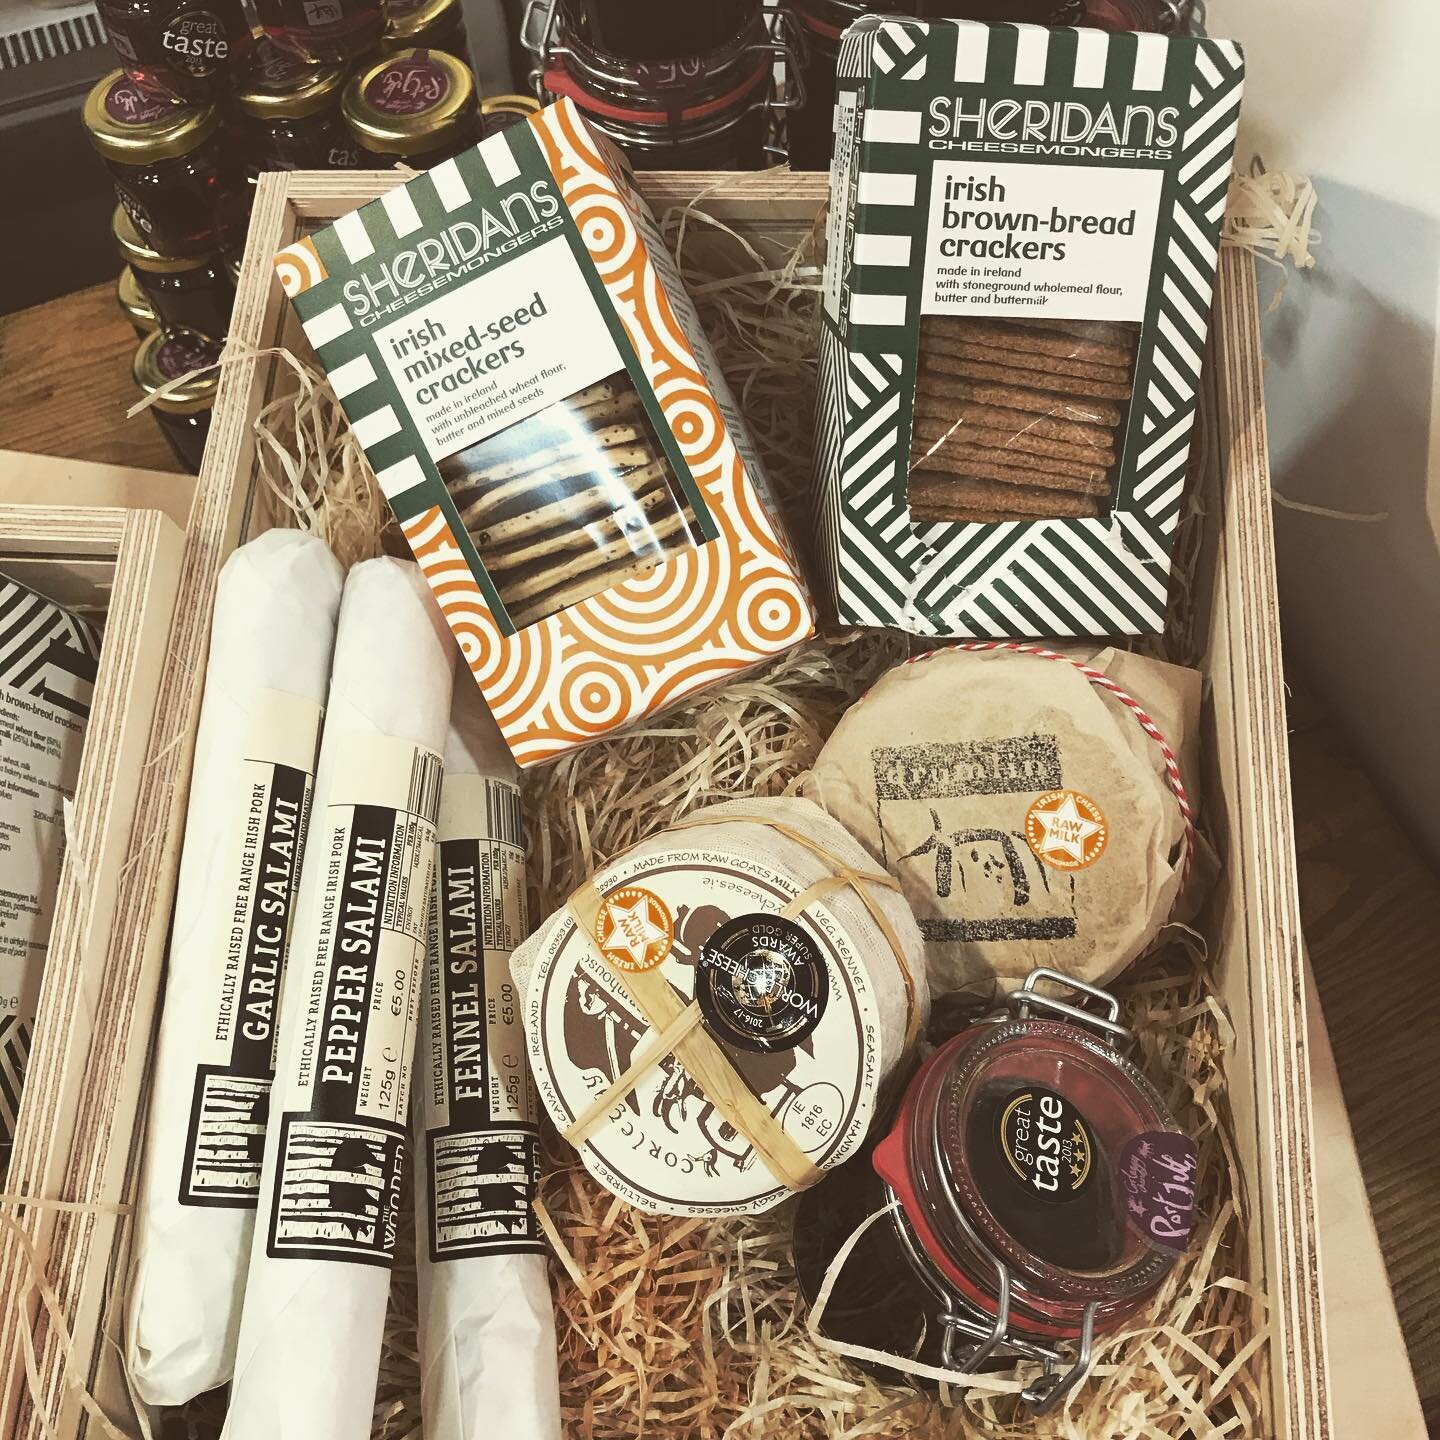 Check out our Christmas hampers...pop by our stand @giftedrds for all your Christmas charcuterie needs #irishcharcuterie #freerangepork #pigsinthewood